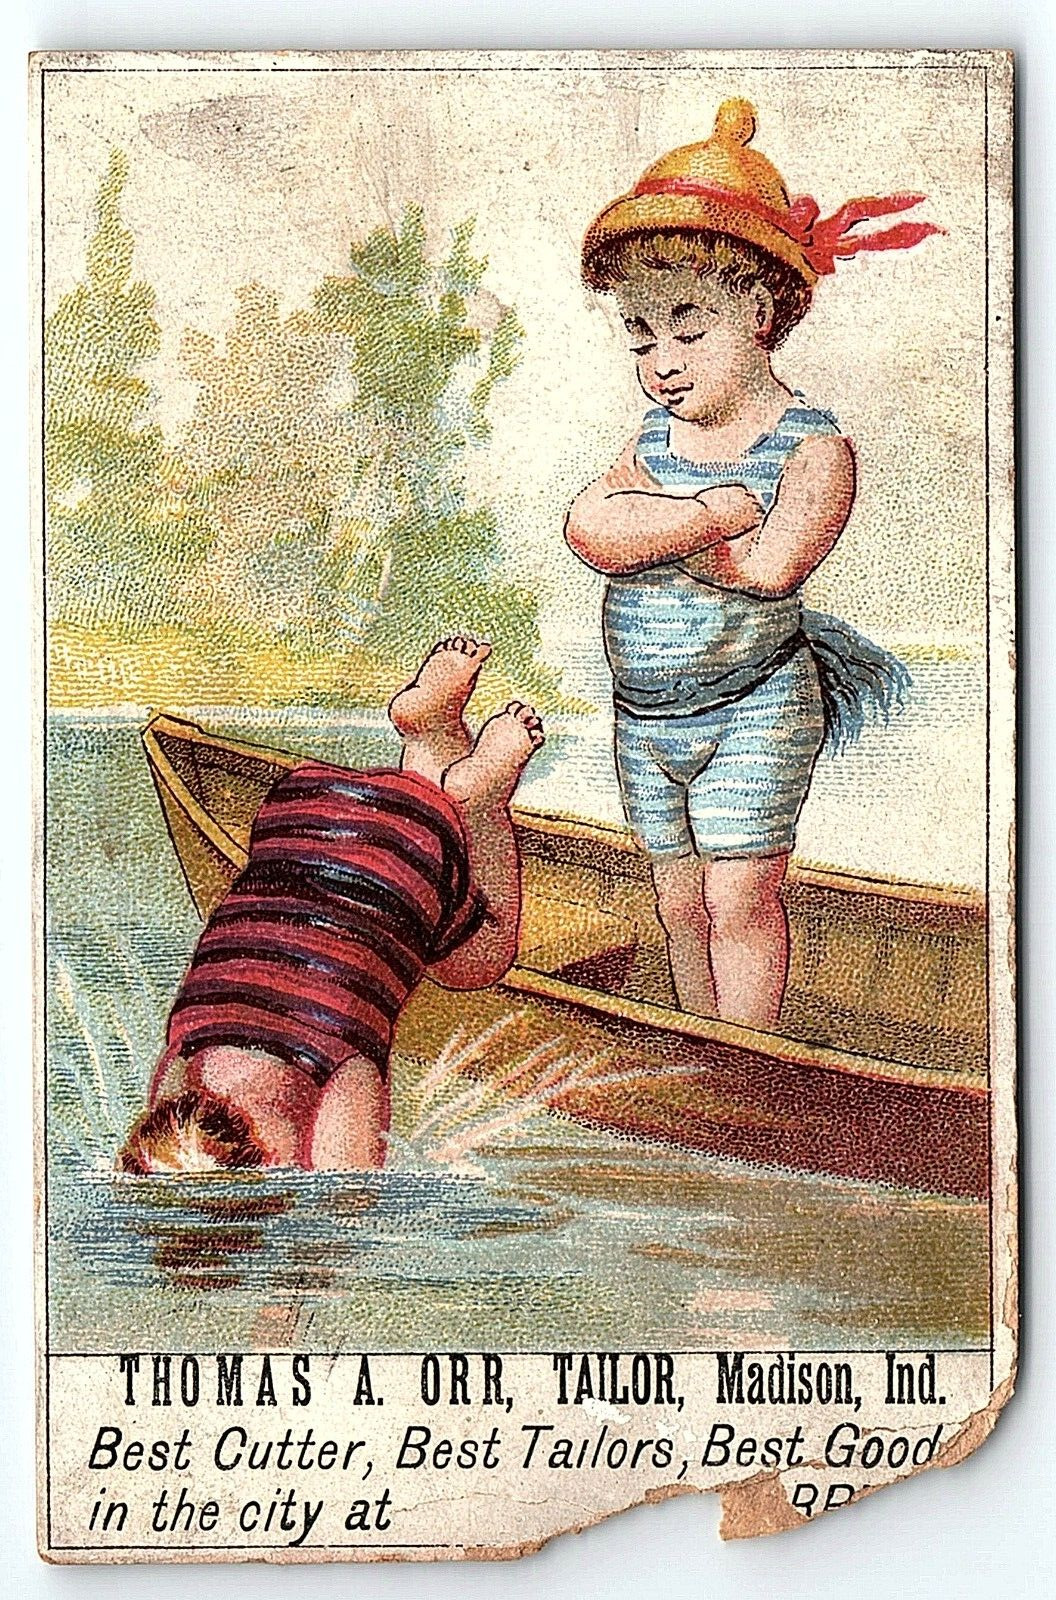 c1880 MADISON INDIANA THOMAS A ORR TAILOR CHILDREN VICTORIAN TRADE CARD Z4140